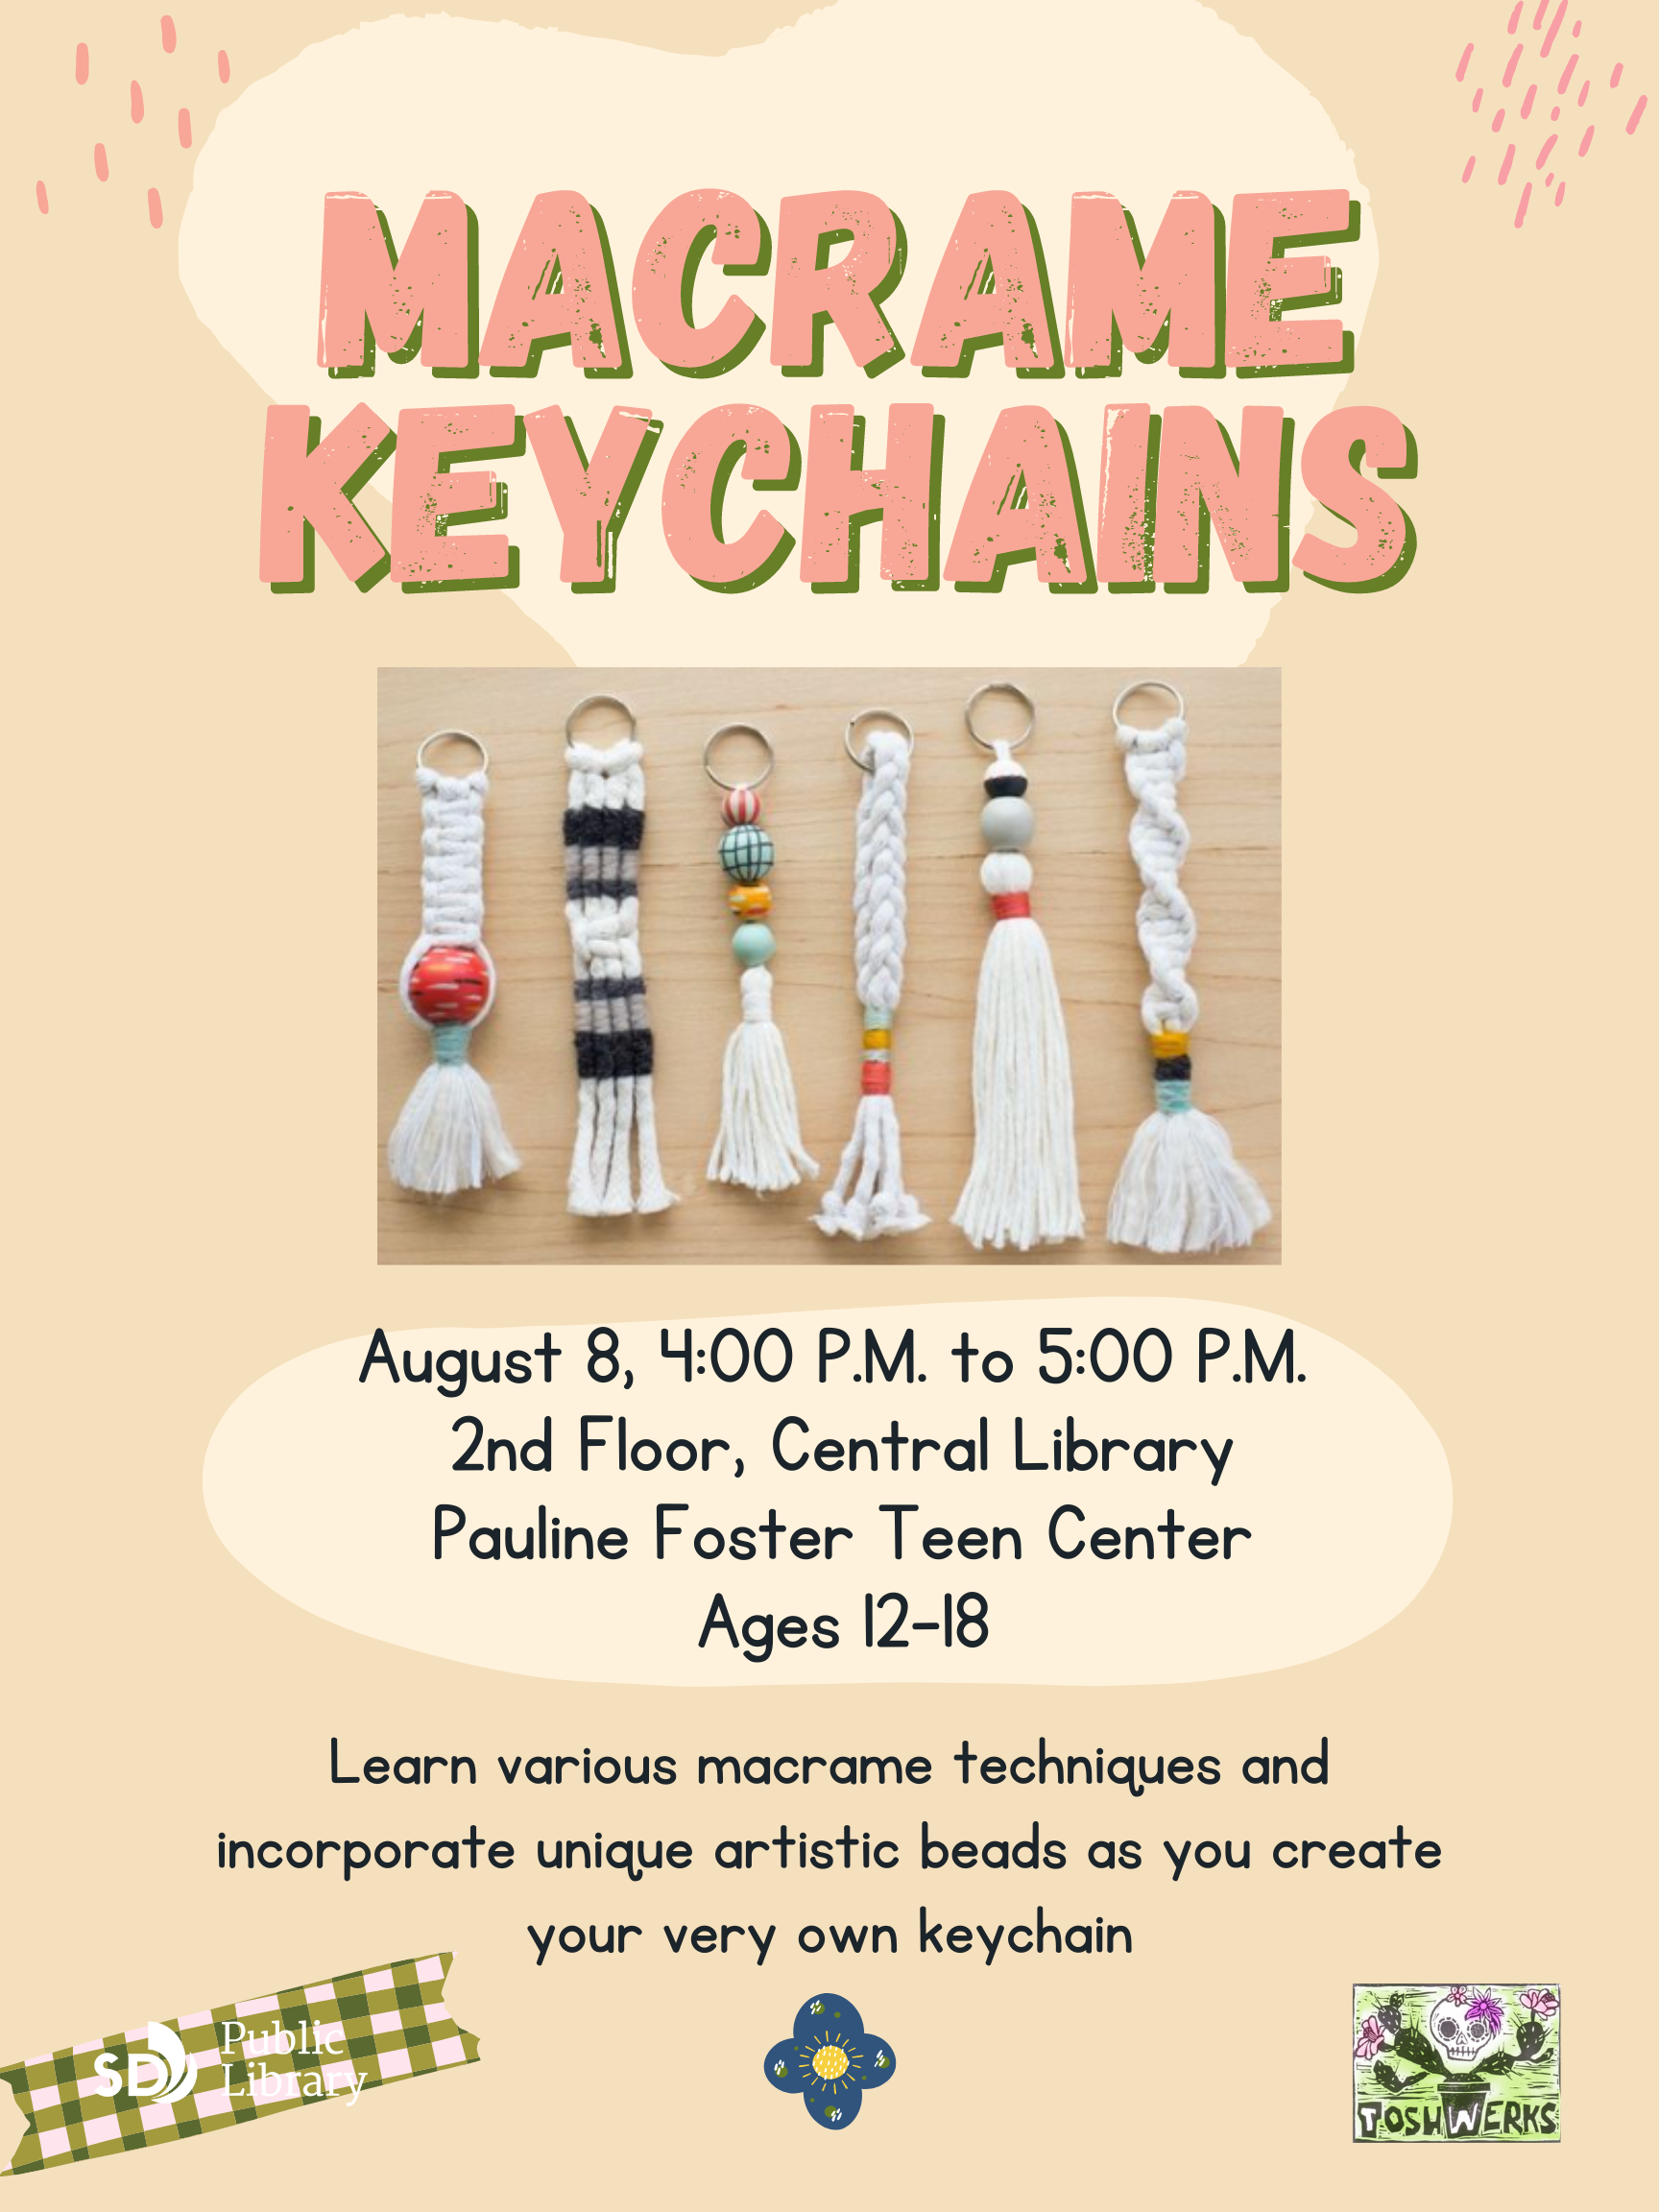 Macrame Keychains. August 8, 4PM to 5PM. 2nd Floor, Central Library. Pauline Foster Teen Center. Ages 12-18. Learn various macrame techniques and incorporate unique artistic beads as you create your very own keychain.